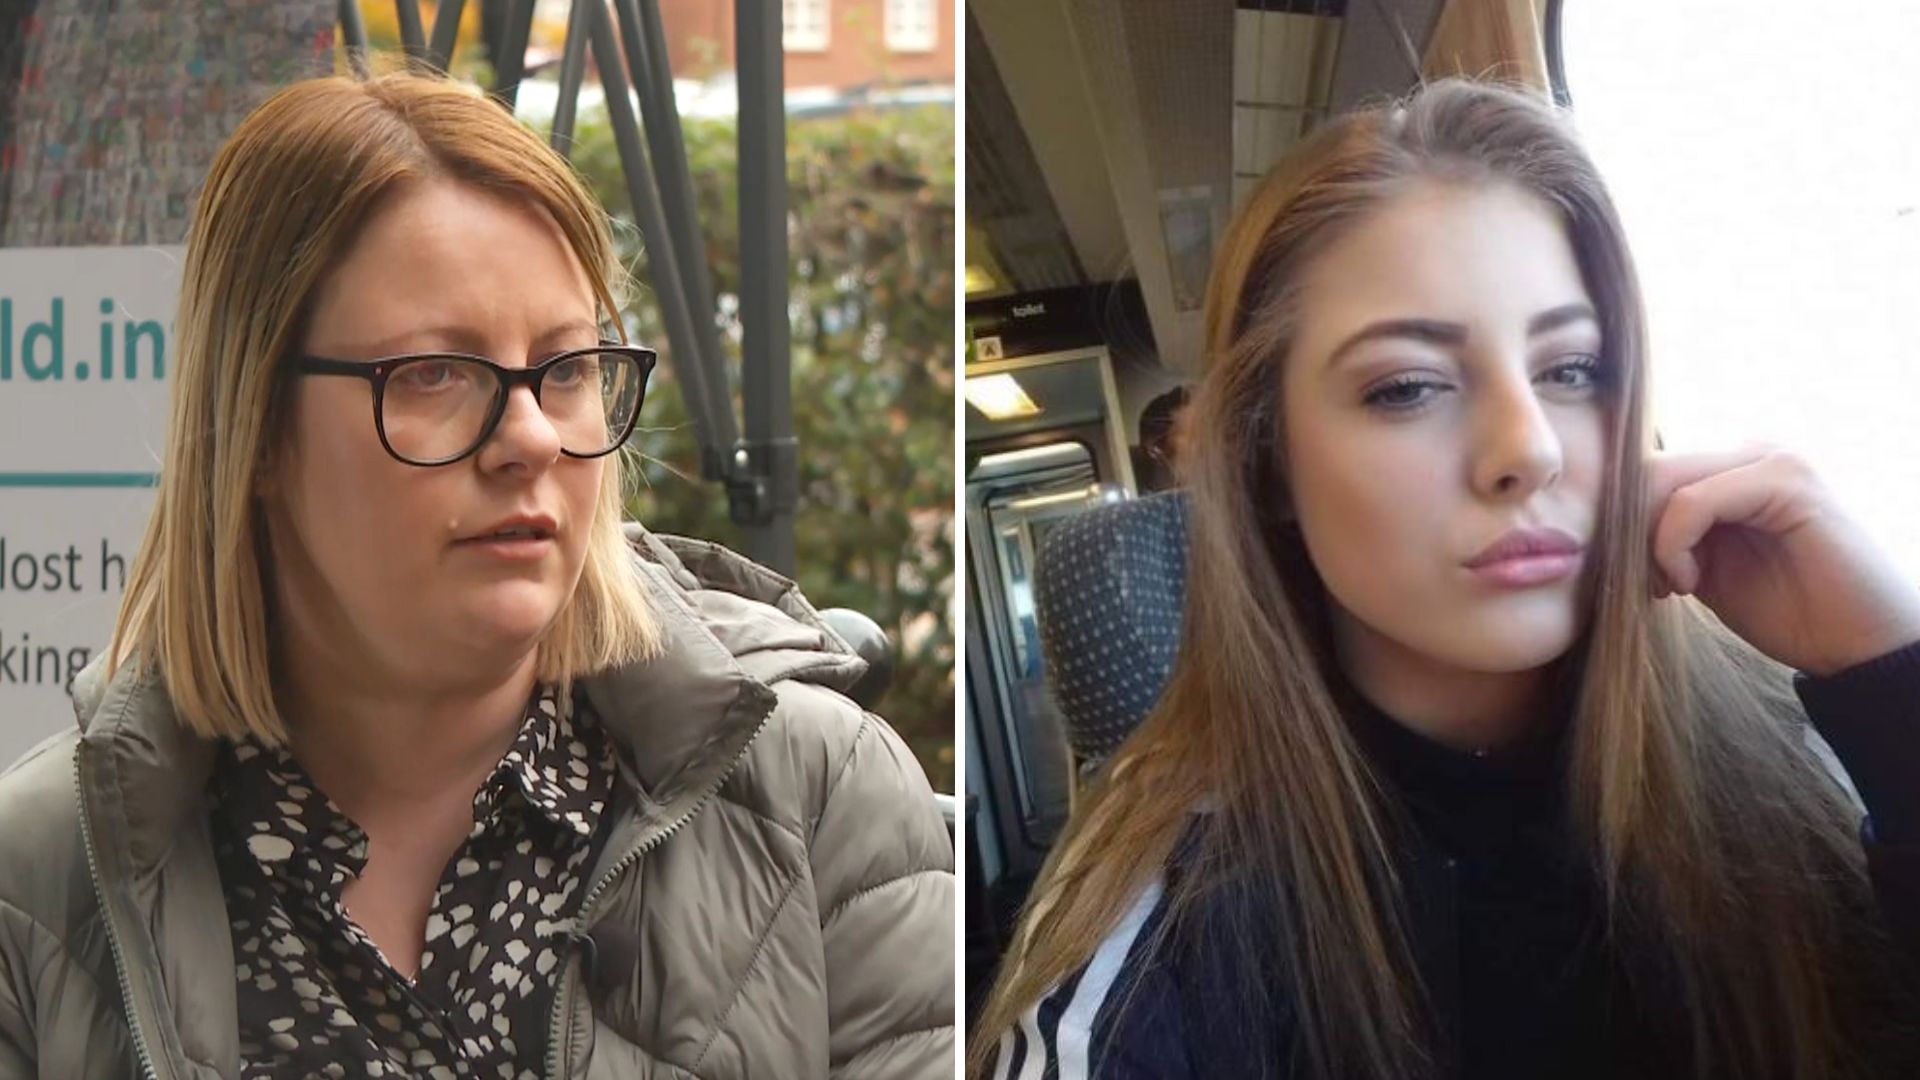 Leah Heyes Mother Launches Campaign To Families Talking About Drugs 